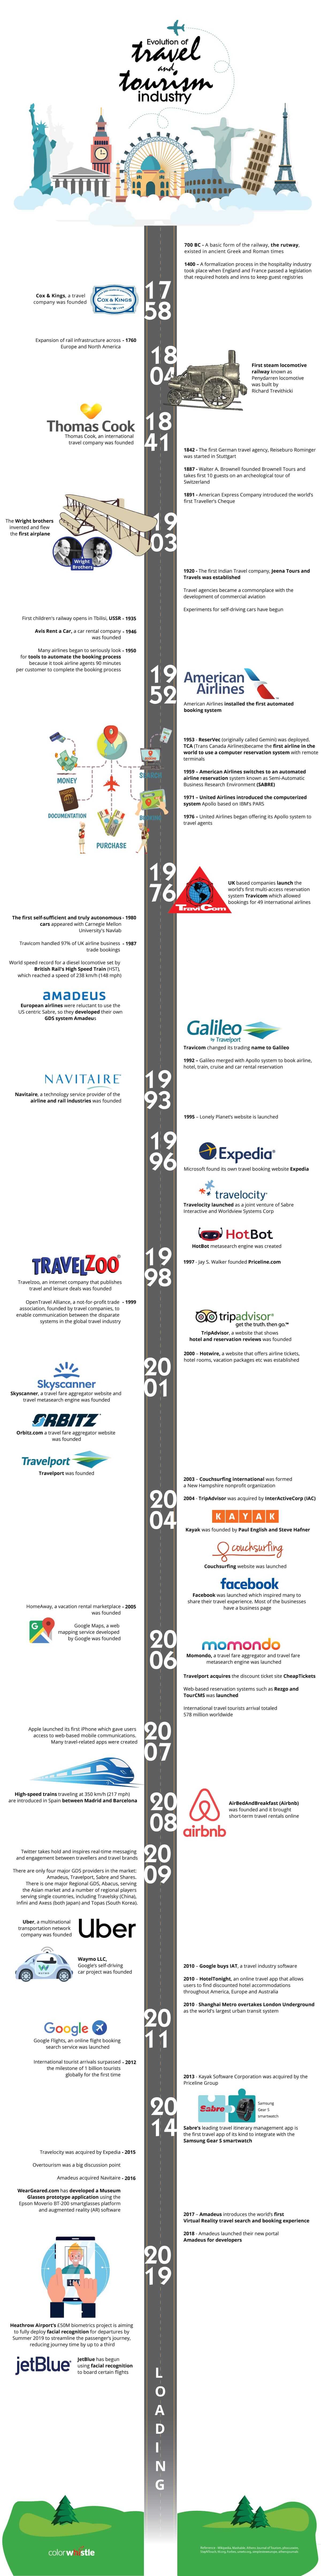 Evolution of Travel and Tourism Industry (Evolution of travel industry infographics) - ColorWhistle